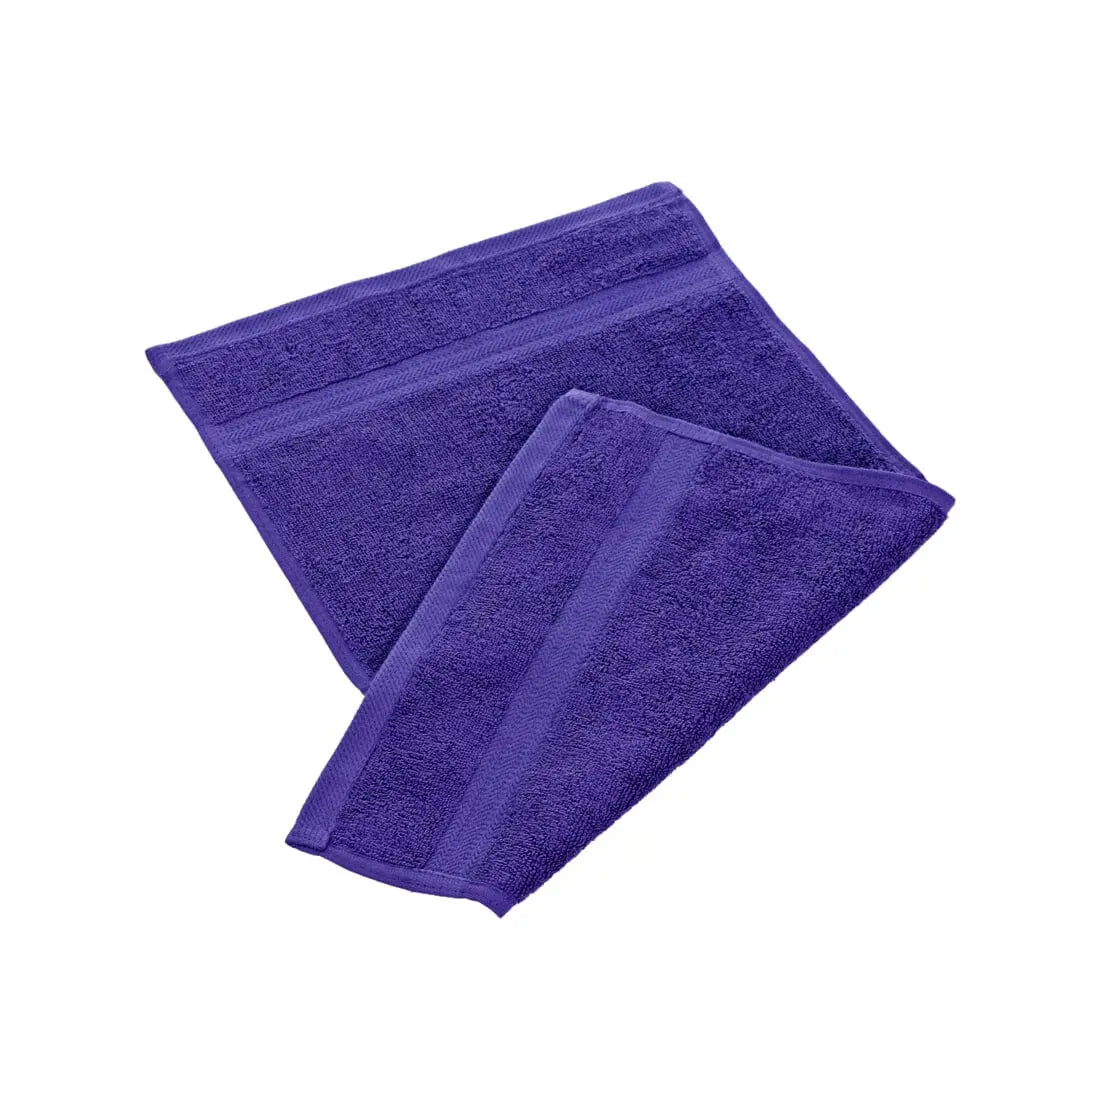 Purple egyptian cotton towel ideal for the gym